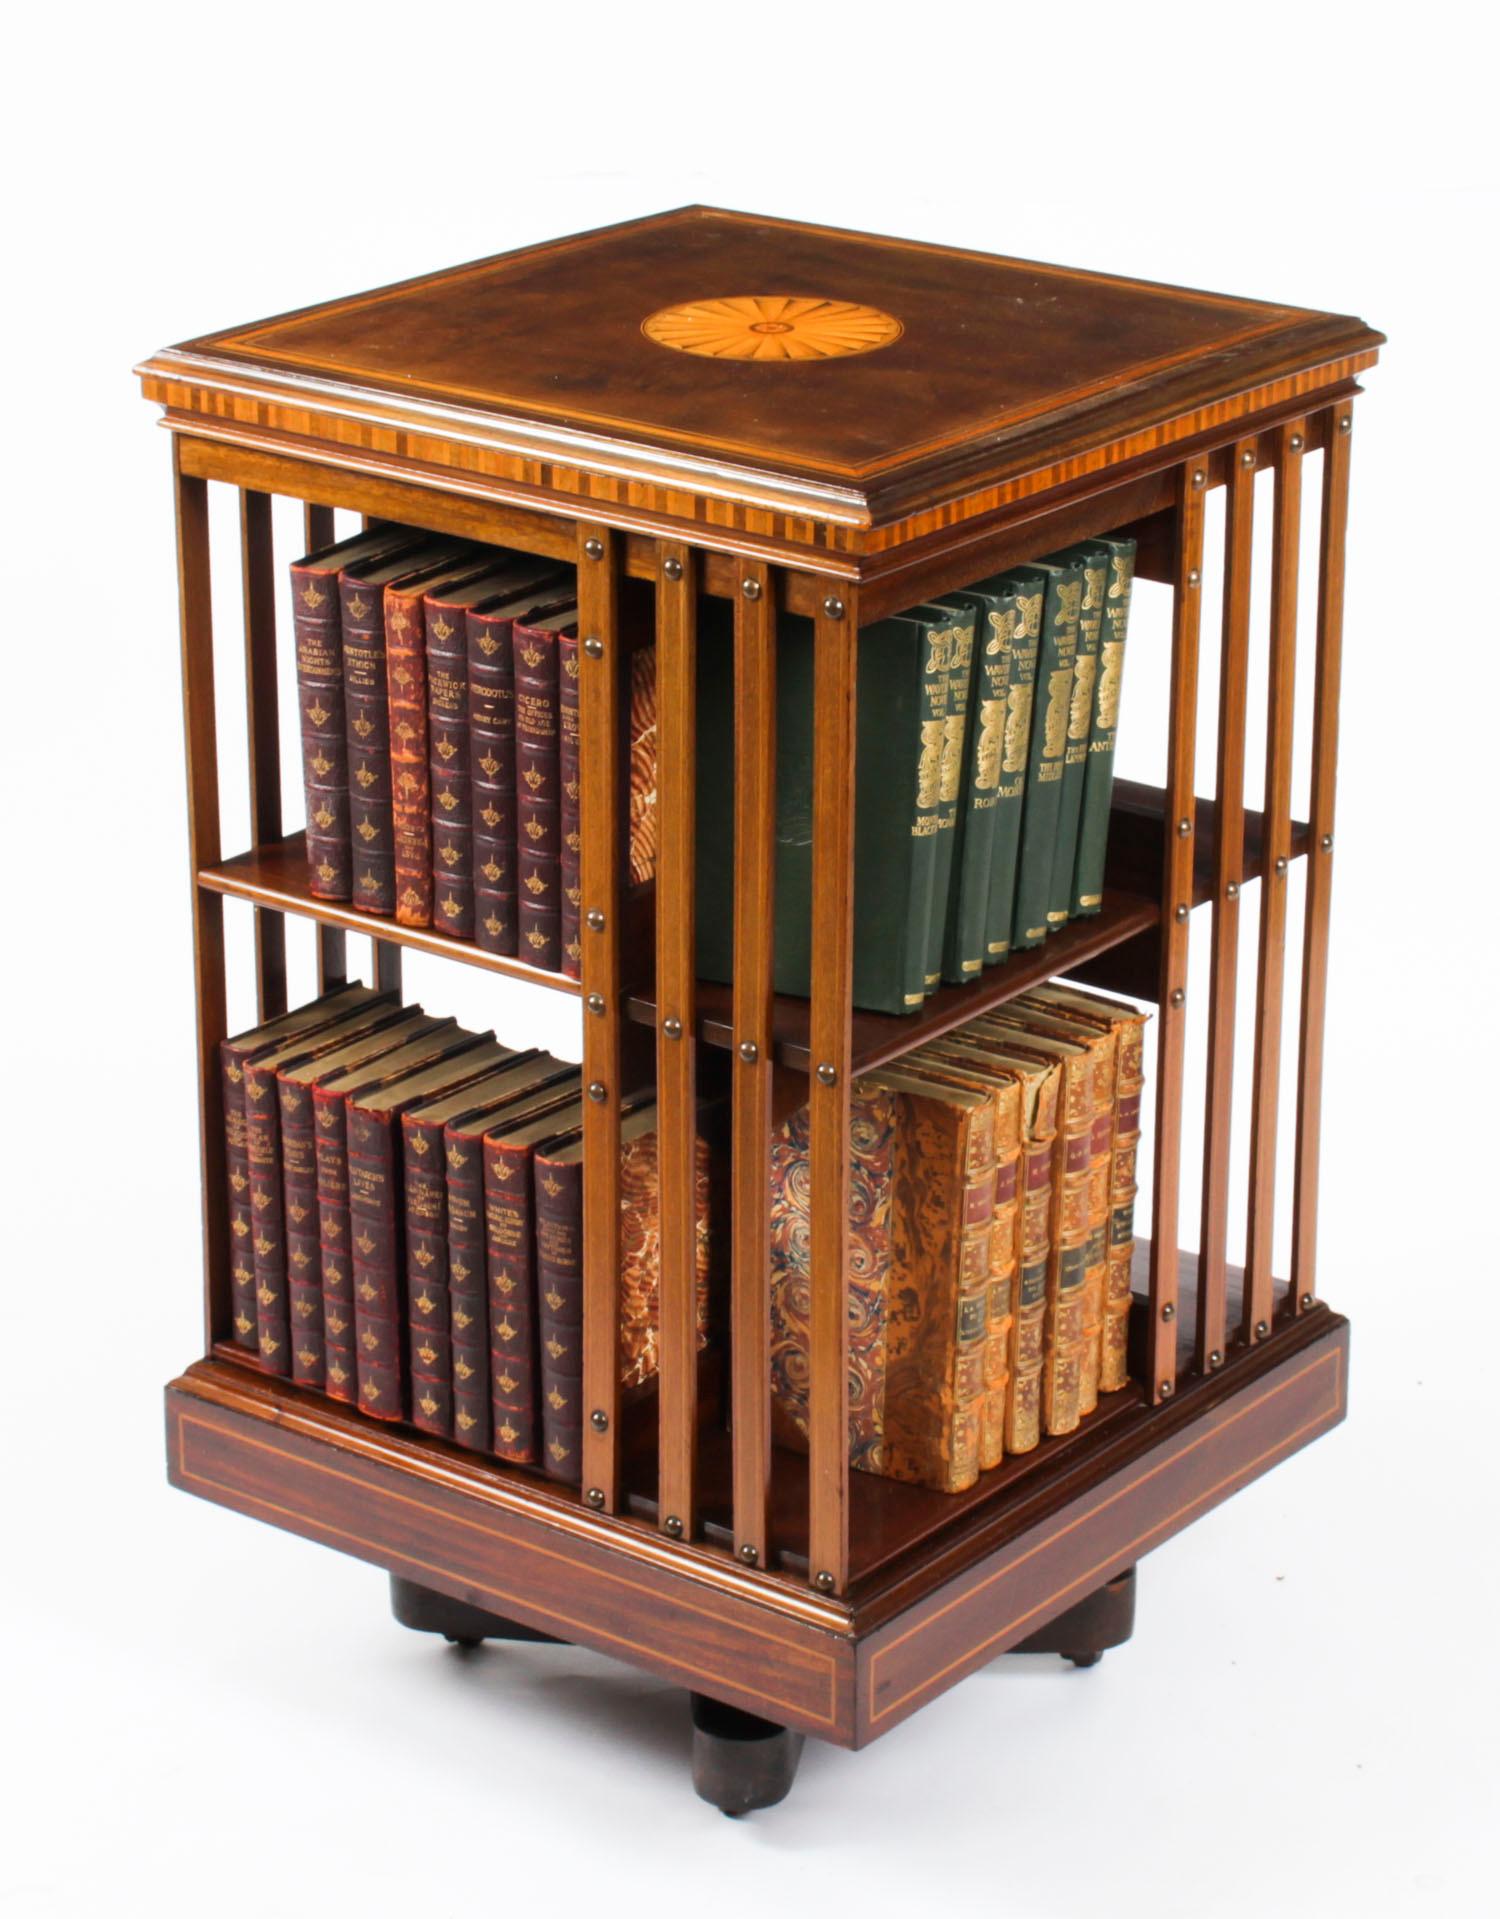 This an exquisite antique revolving bookcase attributed to the renowned Victorian retailer and manufacturer Maple & Co., circa 1900.

It is made of mahogany , revolves on a solid cast iron base, has inlaid boxwood lines to the top and bottom, the